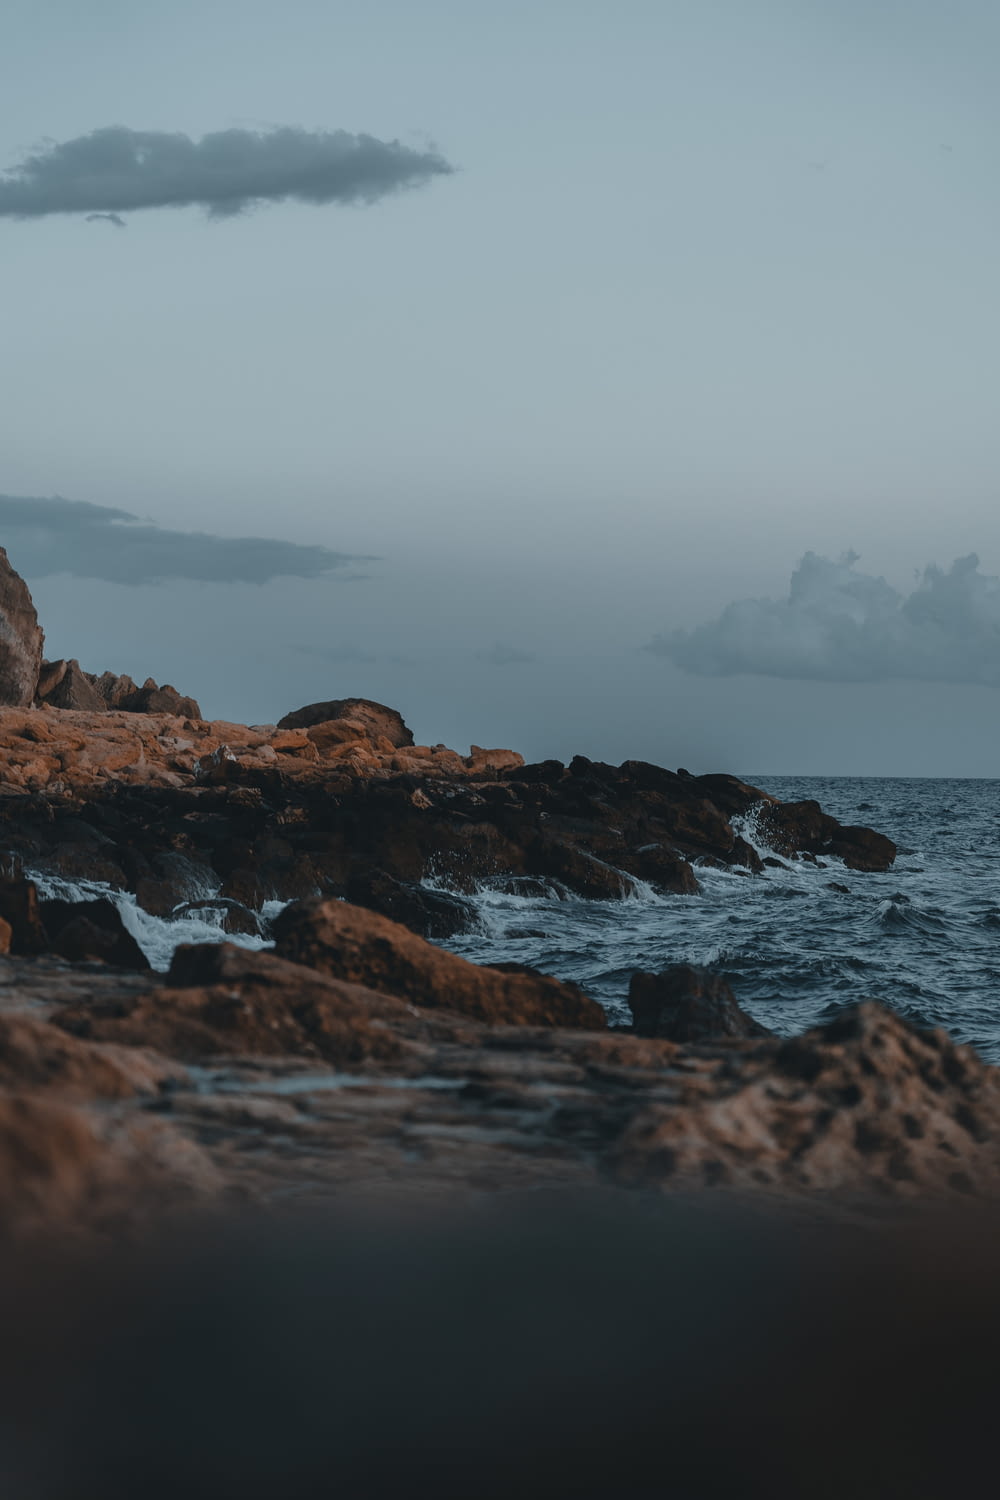 a person standing on a rocky shore next to the ocean